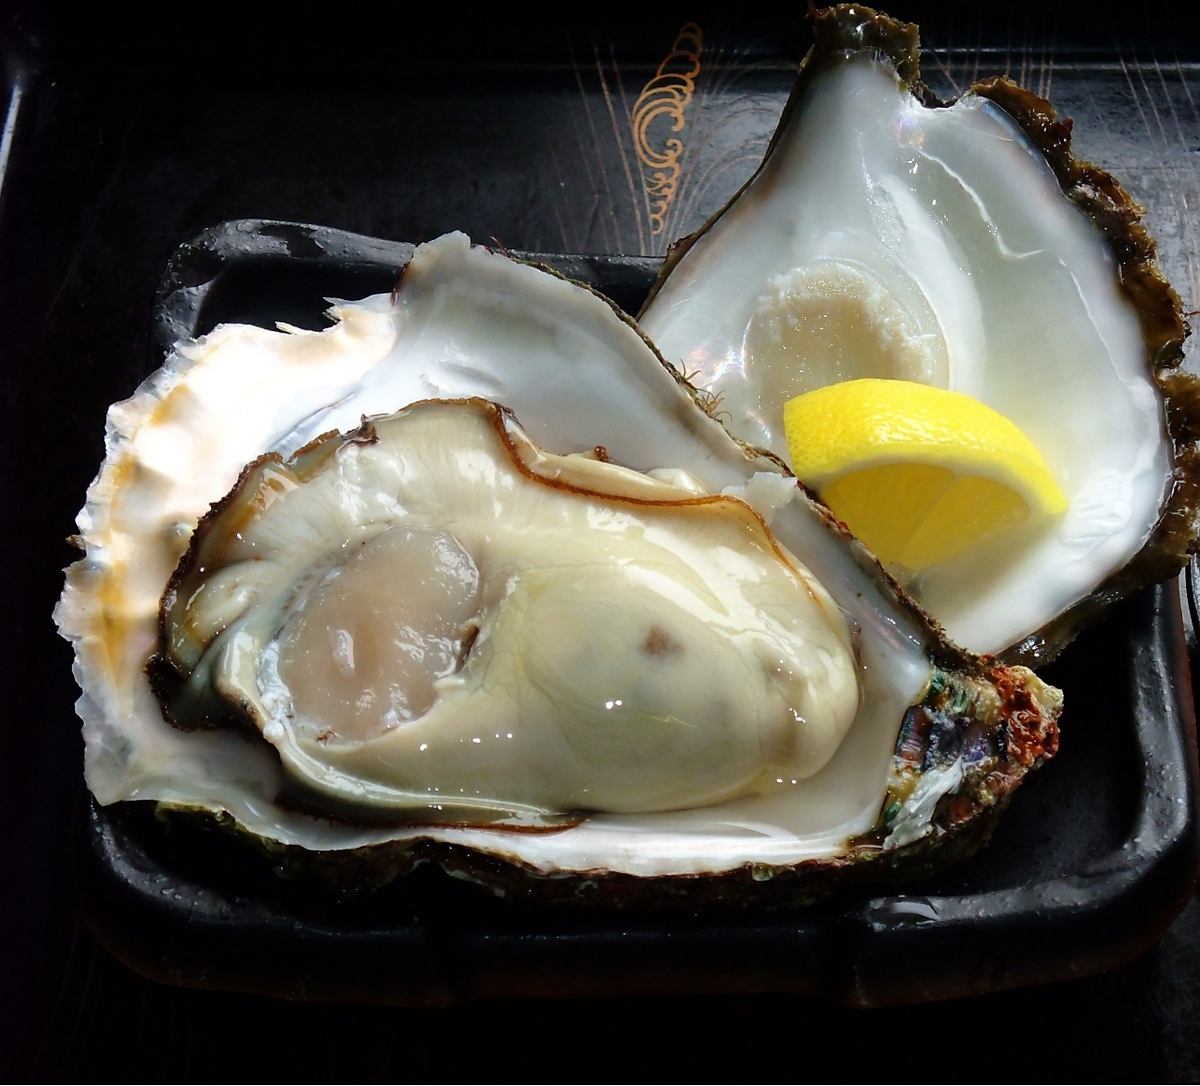 Oysters sent directly from Hirokawa Fisheries in Hiroshima! We offer oyster fries, oyster pots, and hot water baths